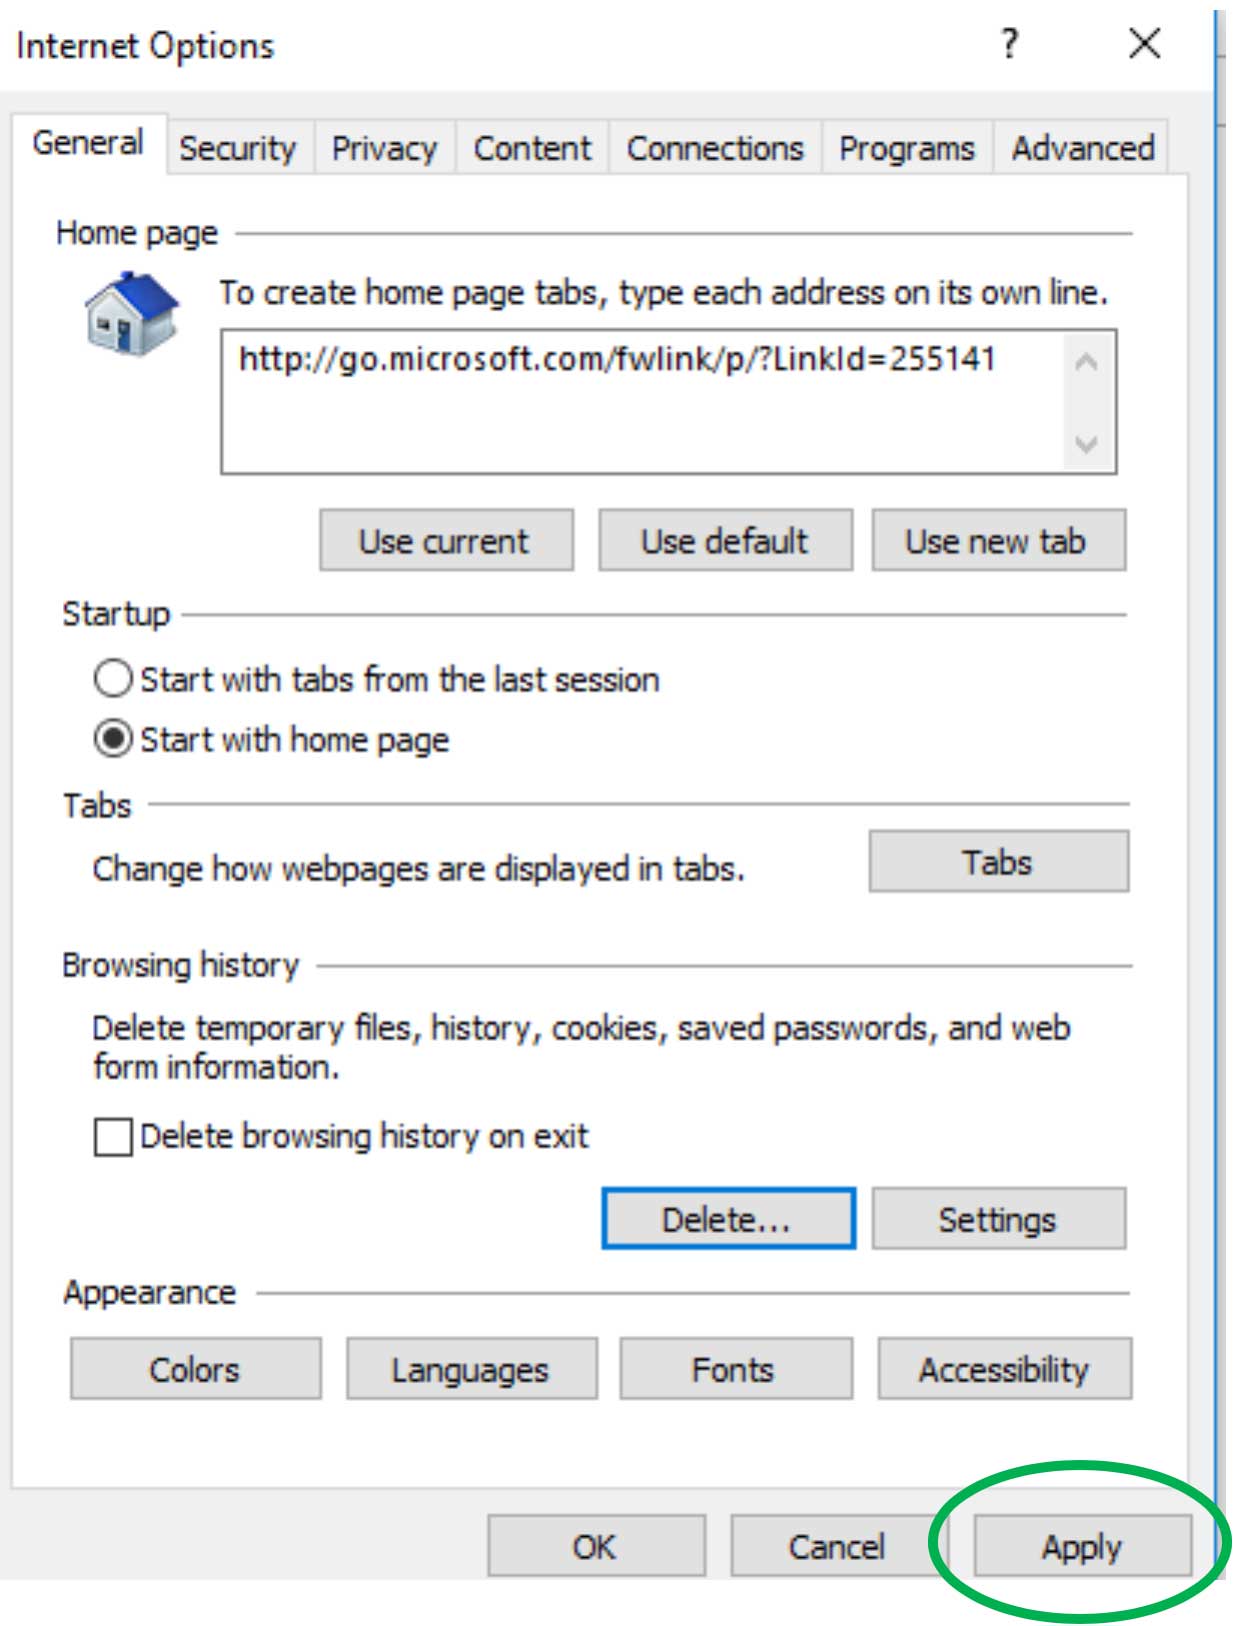 Internet Explorer Internet Options screen with Apply button circled